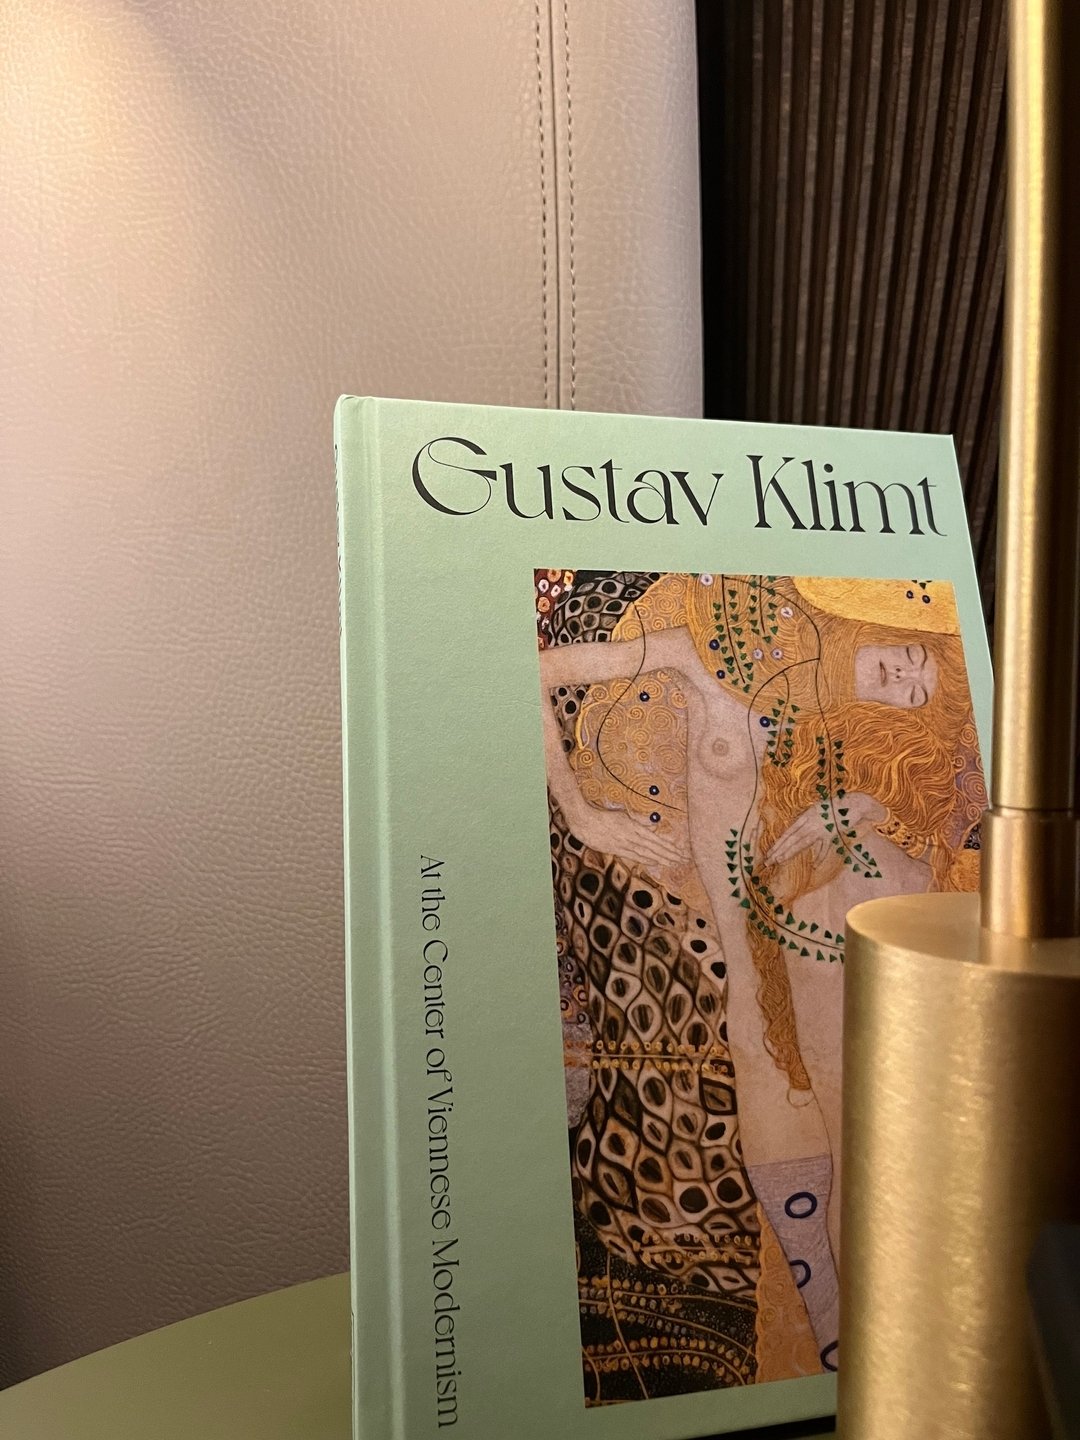 A little klimt...&auml;hhh I mean hint,
about the press trip I'm currently on 👩🏽&zwj;💻 
for @seazentravel...

Can you guess where I am?
A little summary of it soon ✨

MANUSCRIPT
TEXT. KONZEPT. IDEE.
FREELANCE CREATIVE
COPYWRITER
TRAVEL AUTHOR

#ma